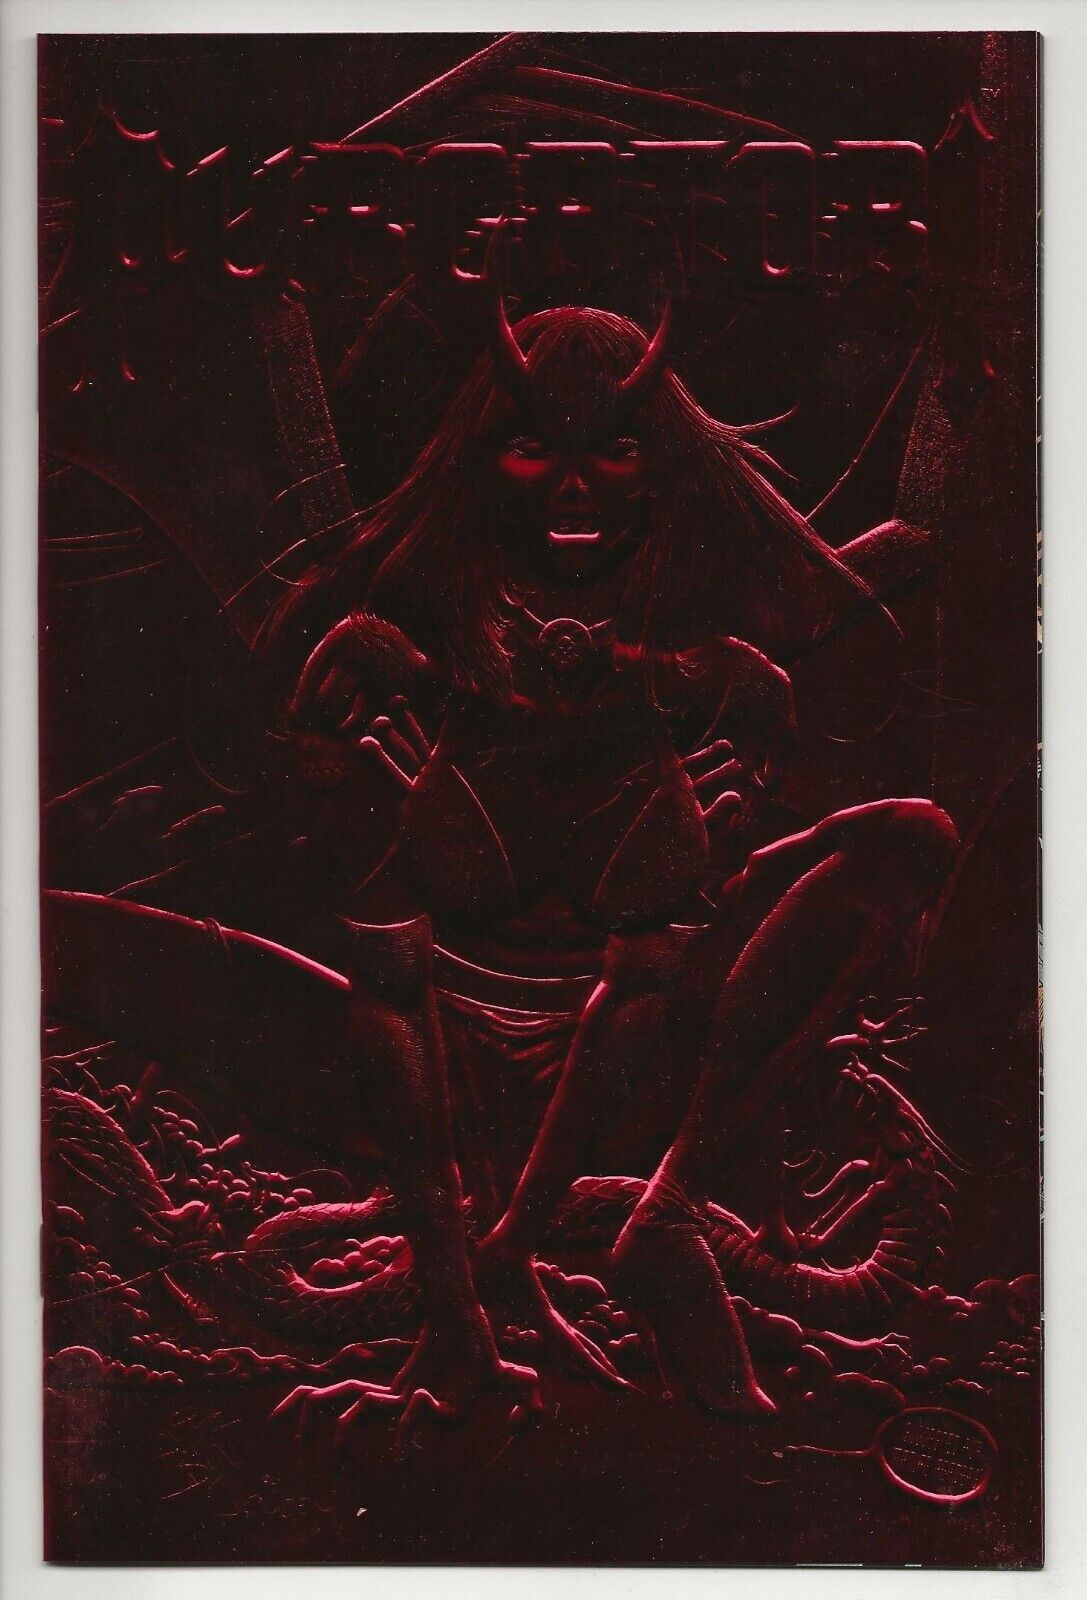 PURGATORI: THE VAMPIRE'S MYTH #1 NM/NM+ (Chaos 1996) Red Foil Embossed Cover